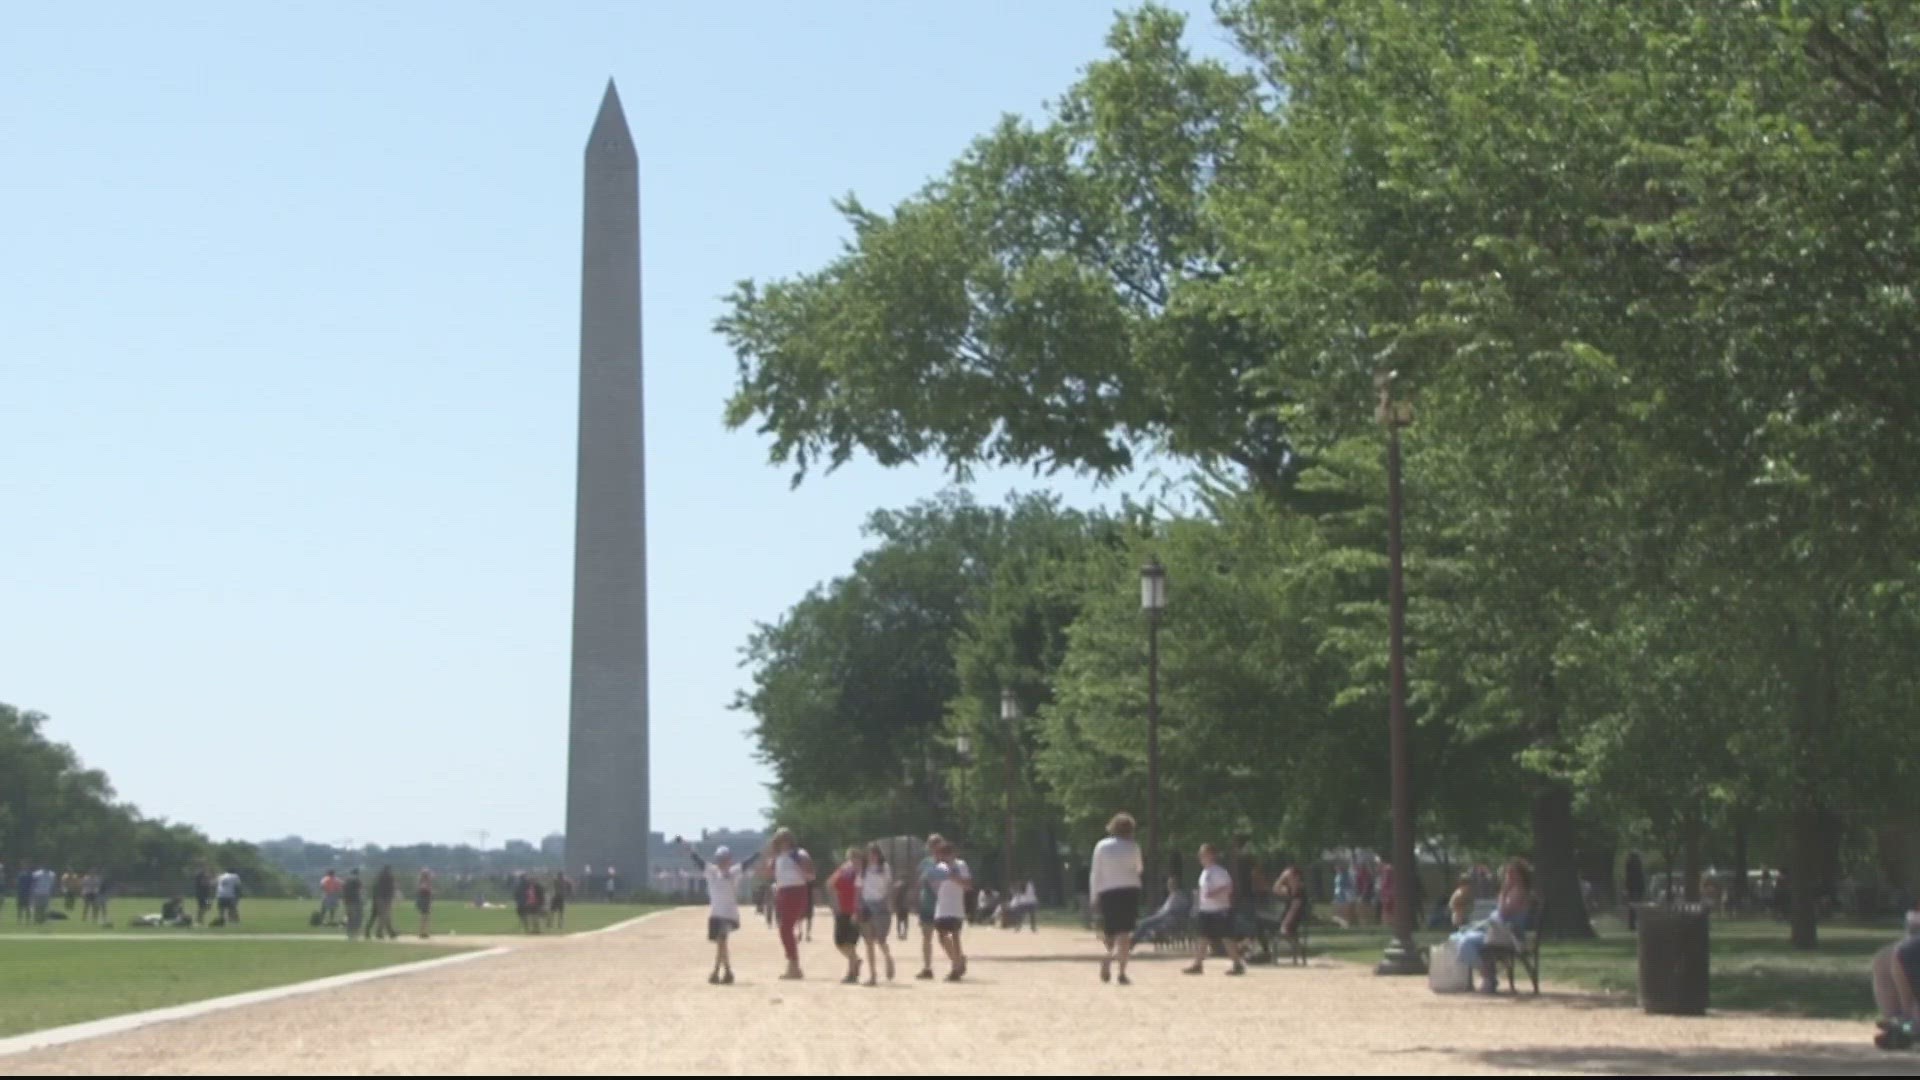 There are plenty of gorgeous parks in DC. But others could use some upkeep.